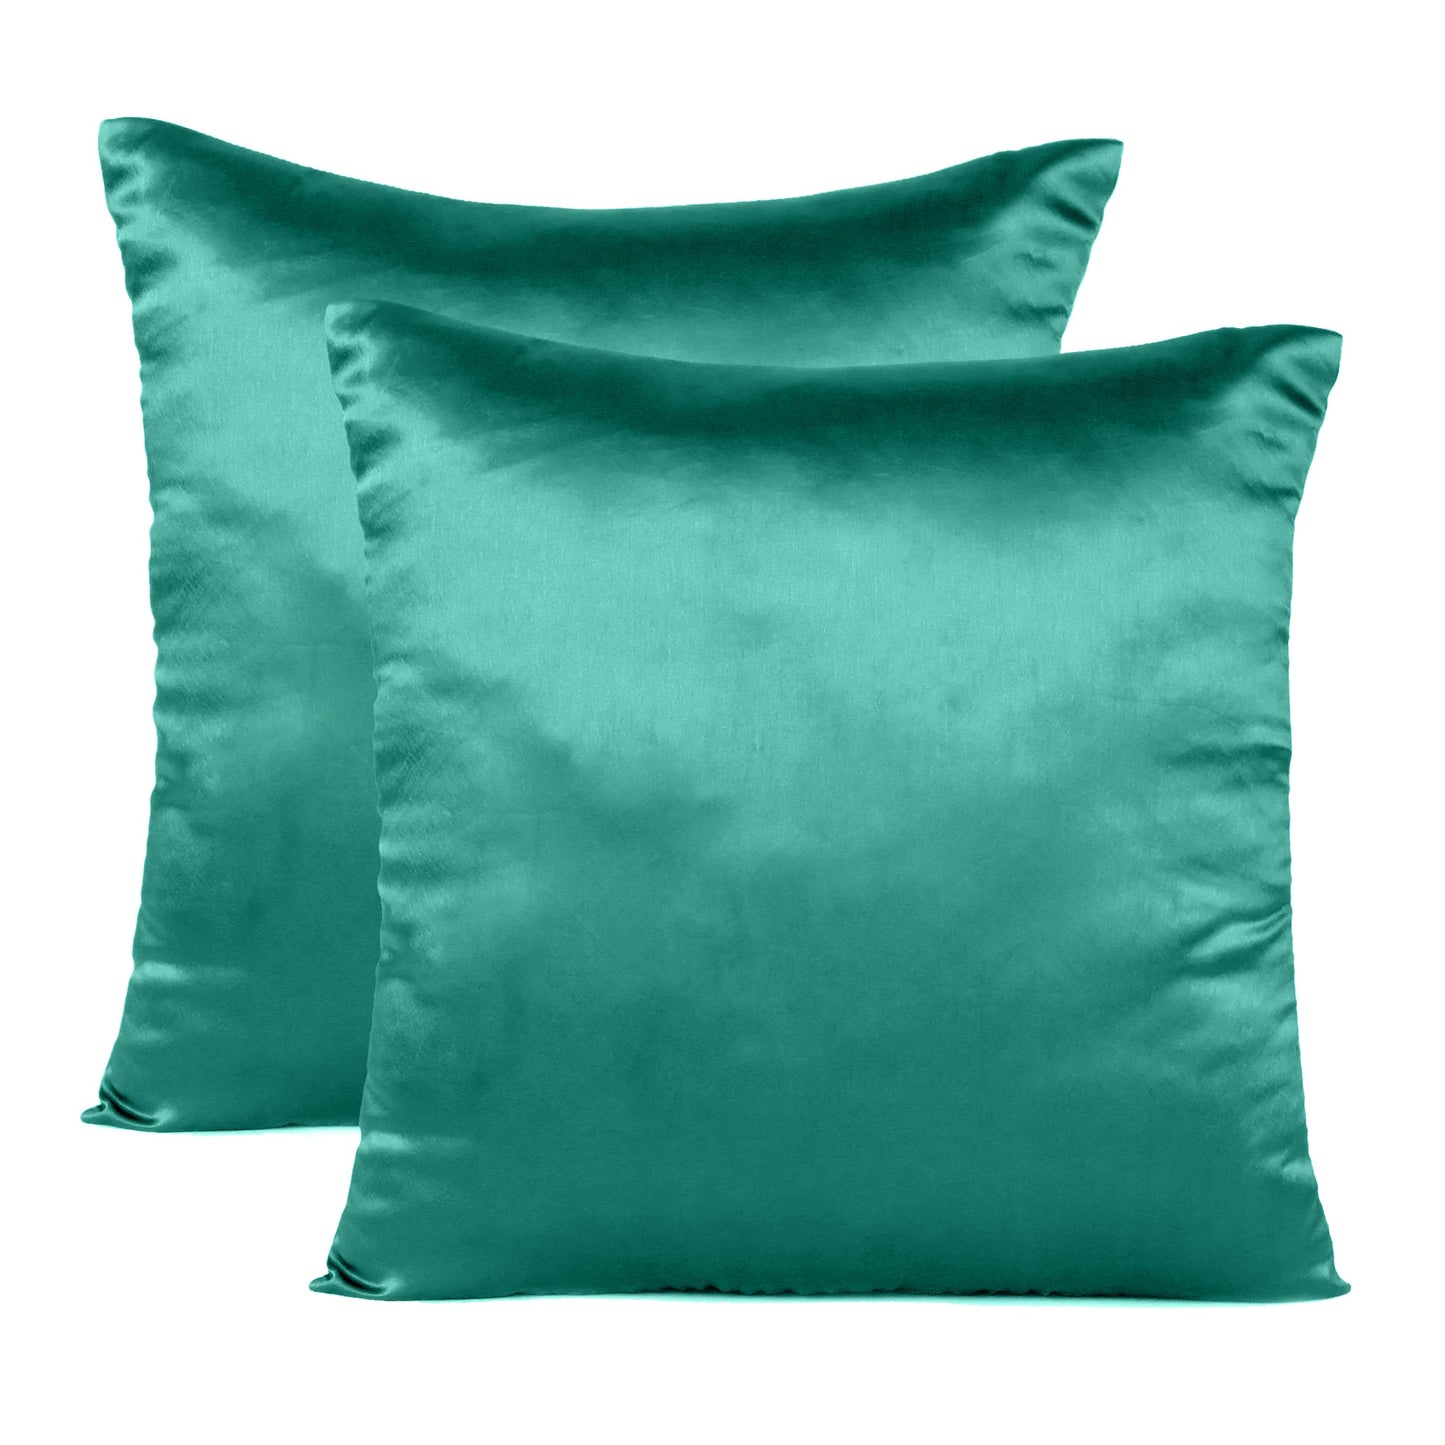 Bayberry Green Satin Silky Cushion Covers in Set of 2